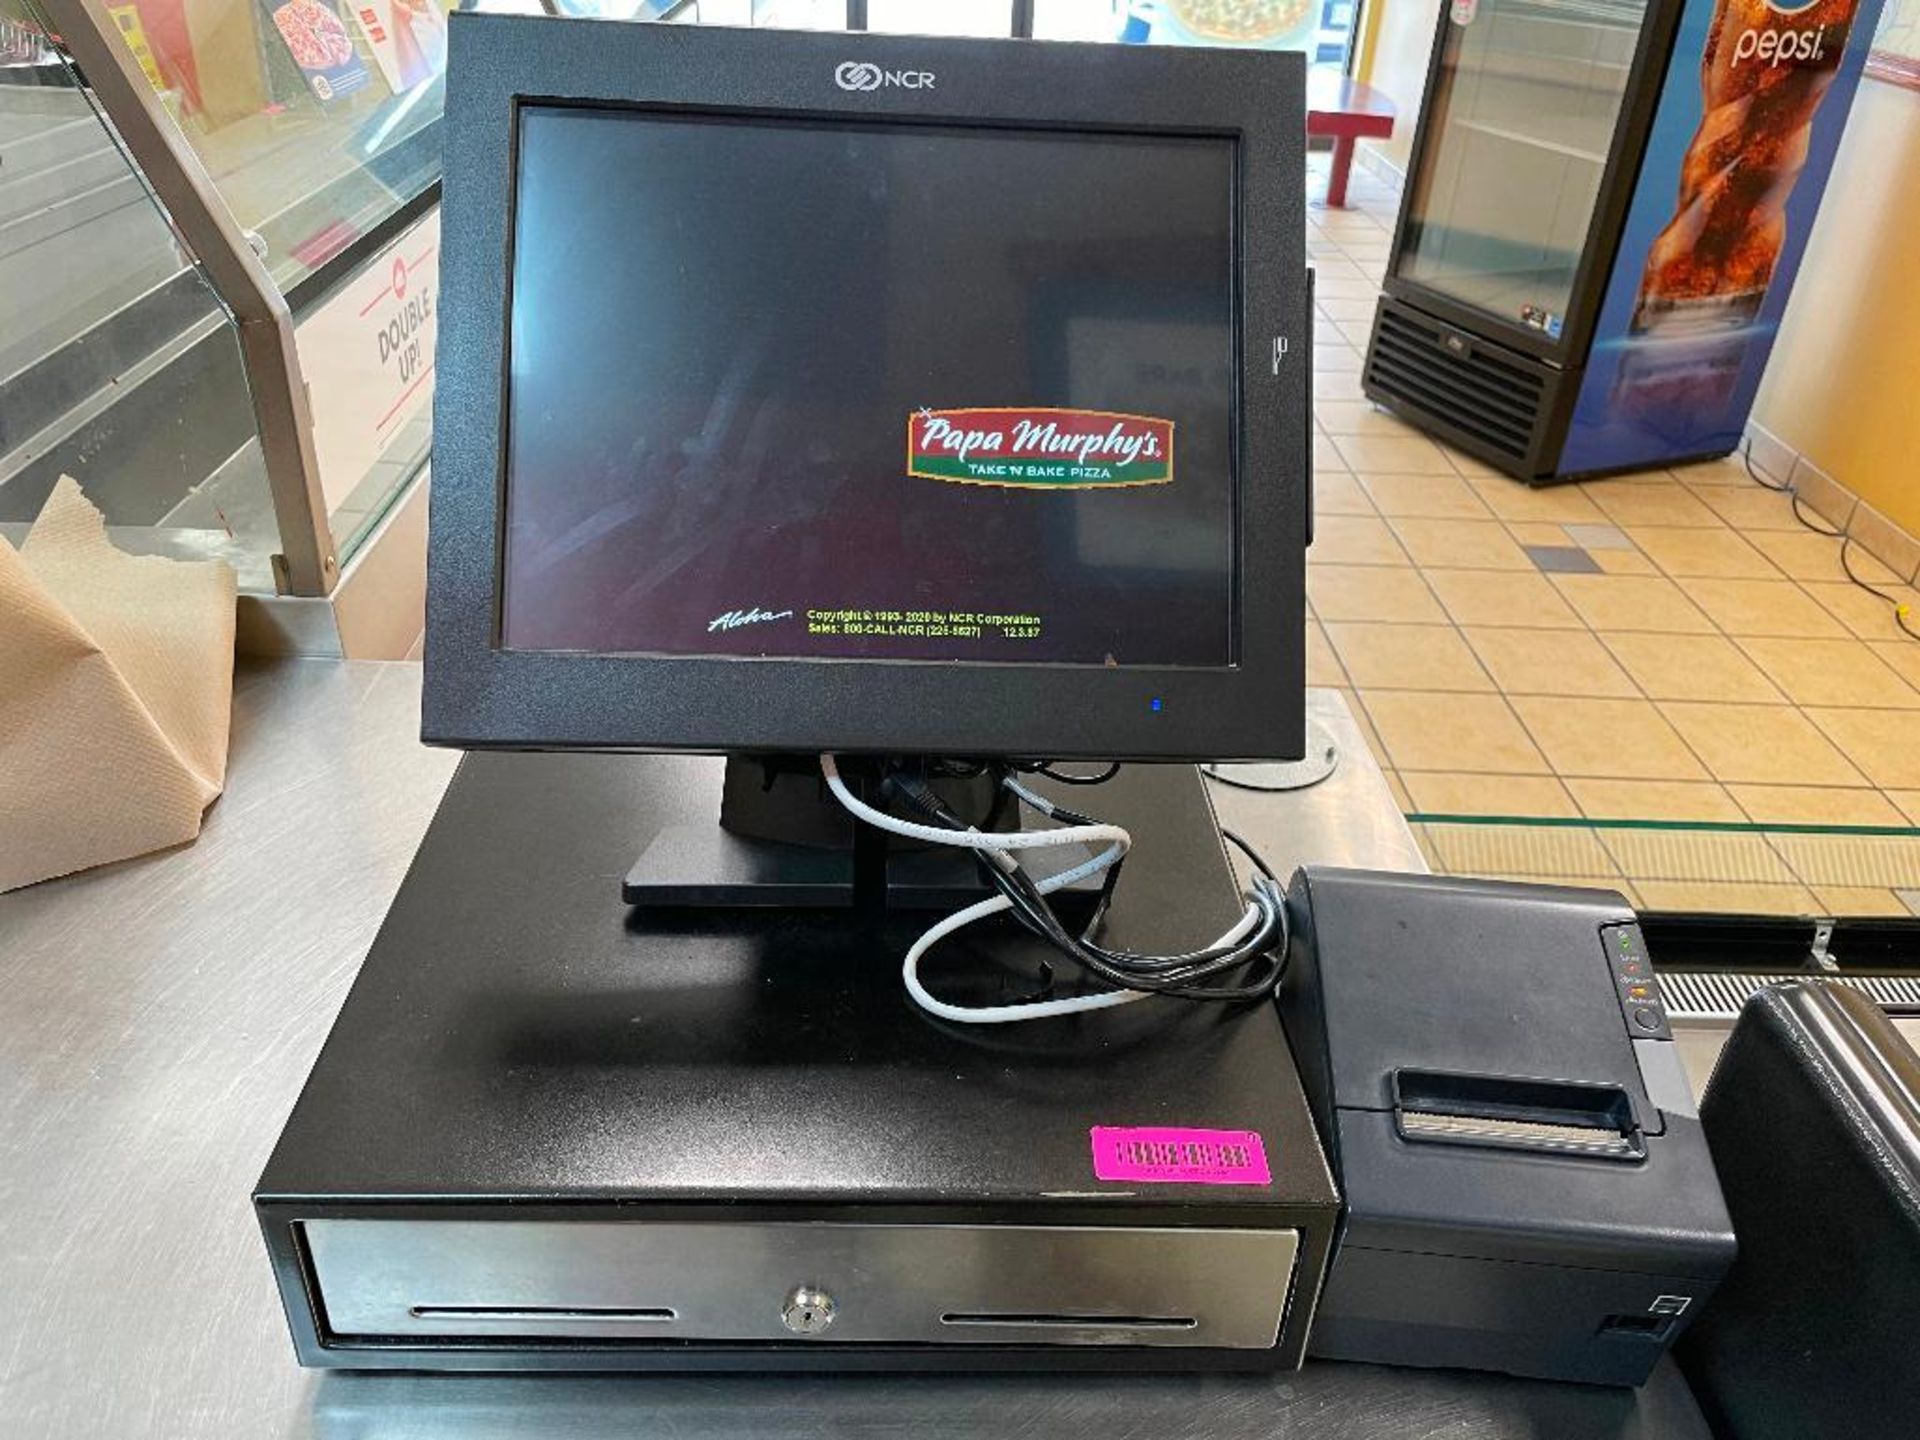 DESCRIPTION: (2) TERMINAL NCR TOUCH SCREEN POS SYSTEM W/ BACK OFFICE COMPUTER, (3) TABLETS, AND MONI